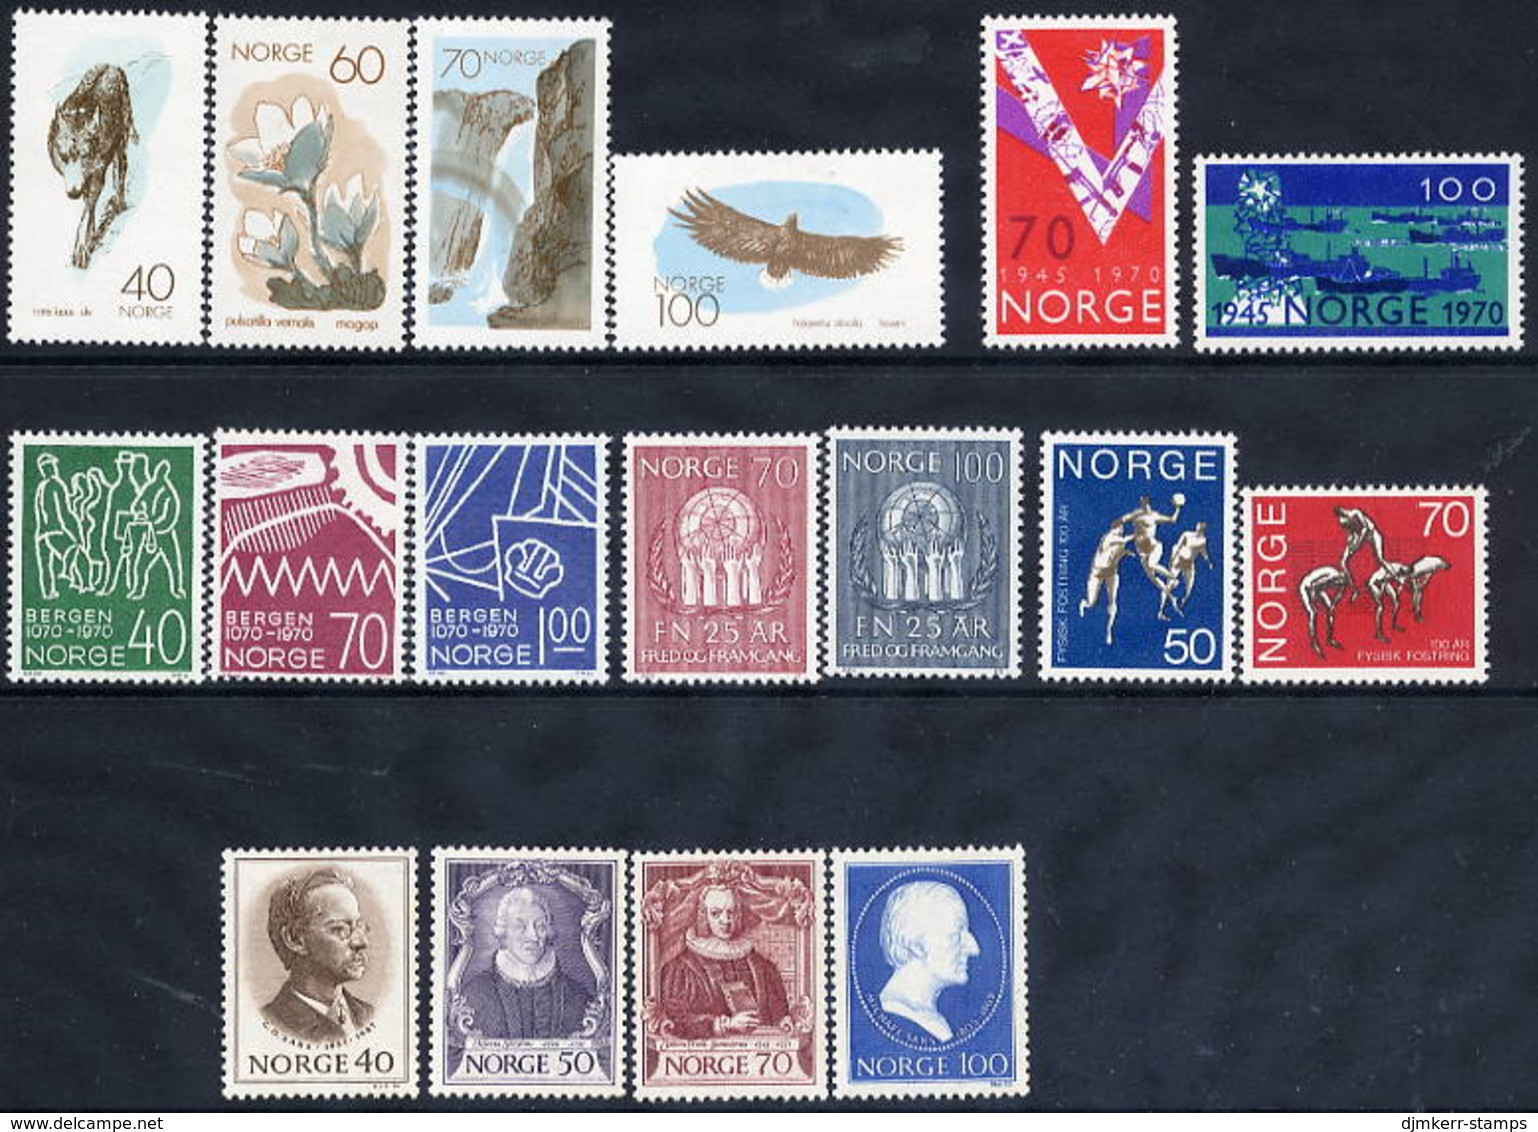 NORWAY 1970 Complete Commemorative Issues MNH / **. - Años Completos